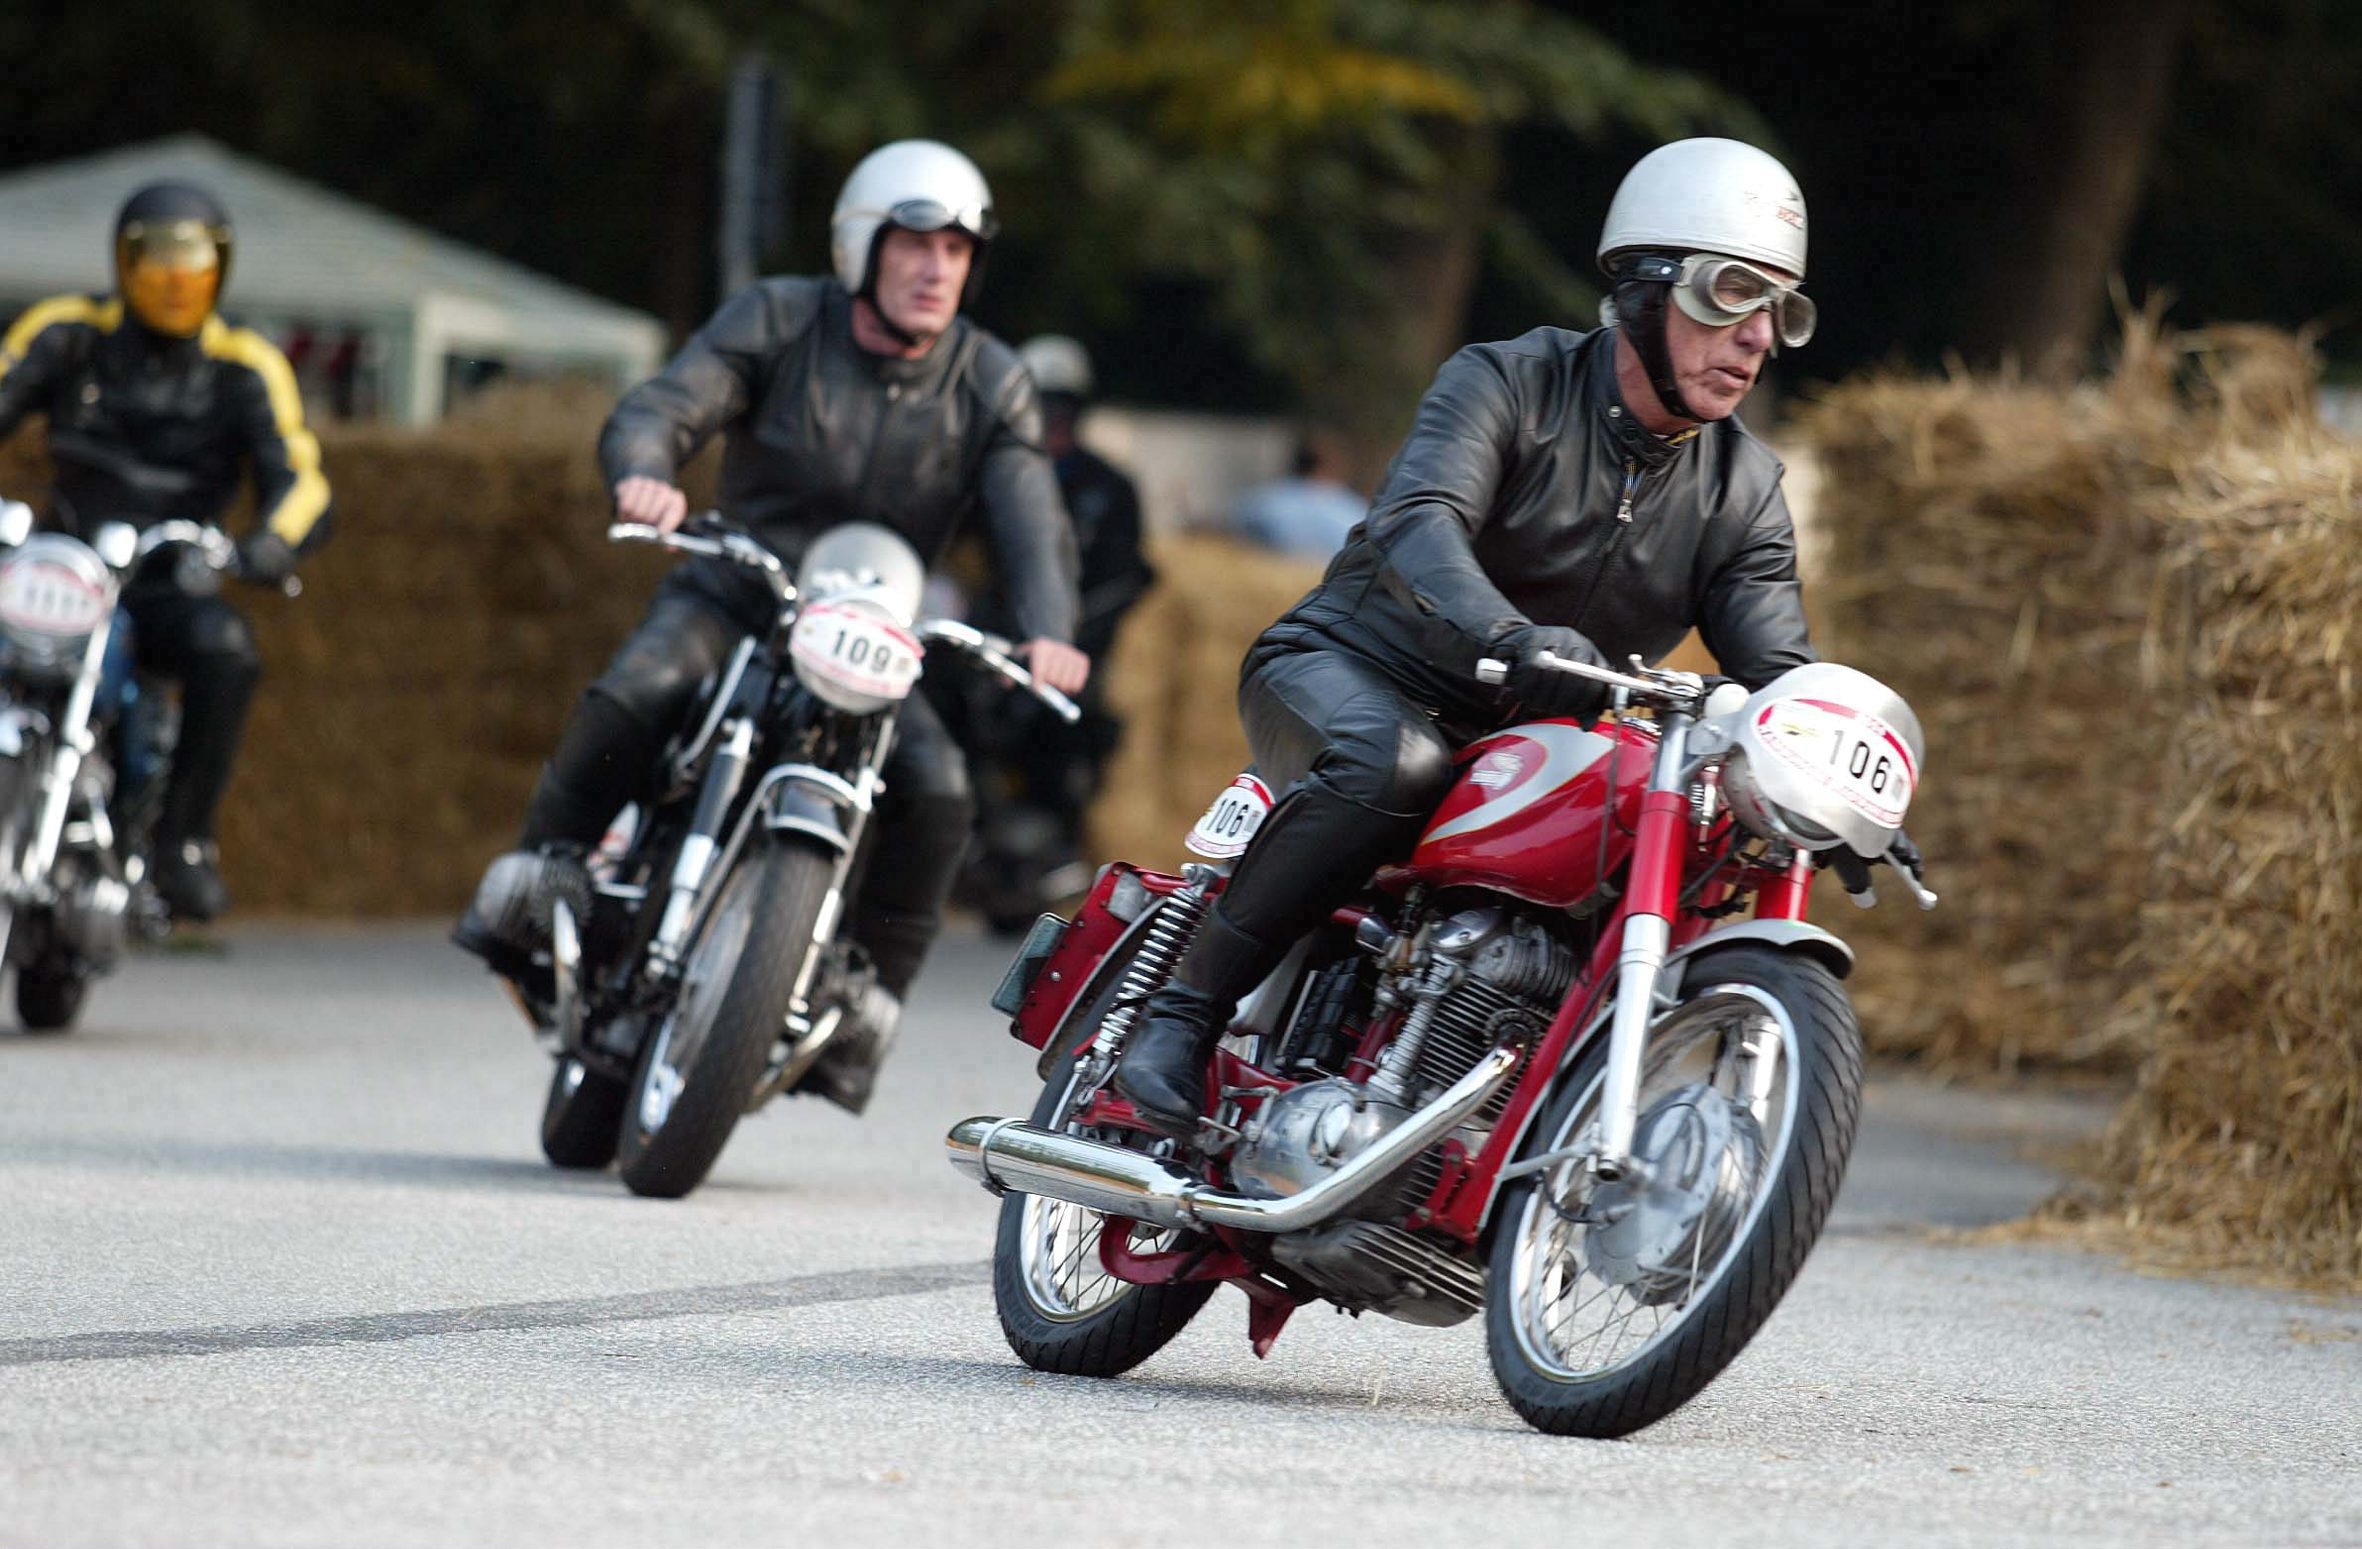 A black-clad rider on a red-and-silver 1967 Ducati Mach 1 leads 1966 BMW R50 and 1969 Norton Commando at a 2004 Hamburg, Germany race